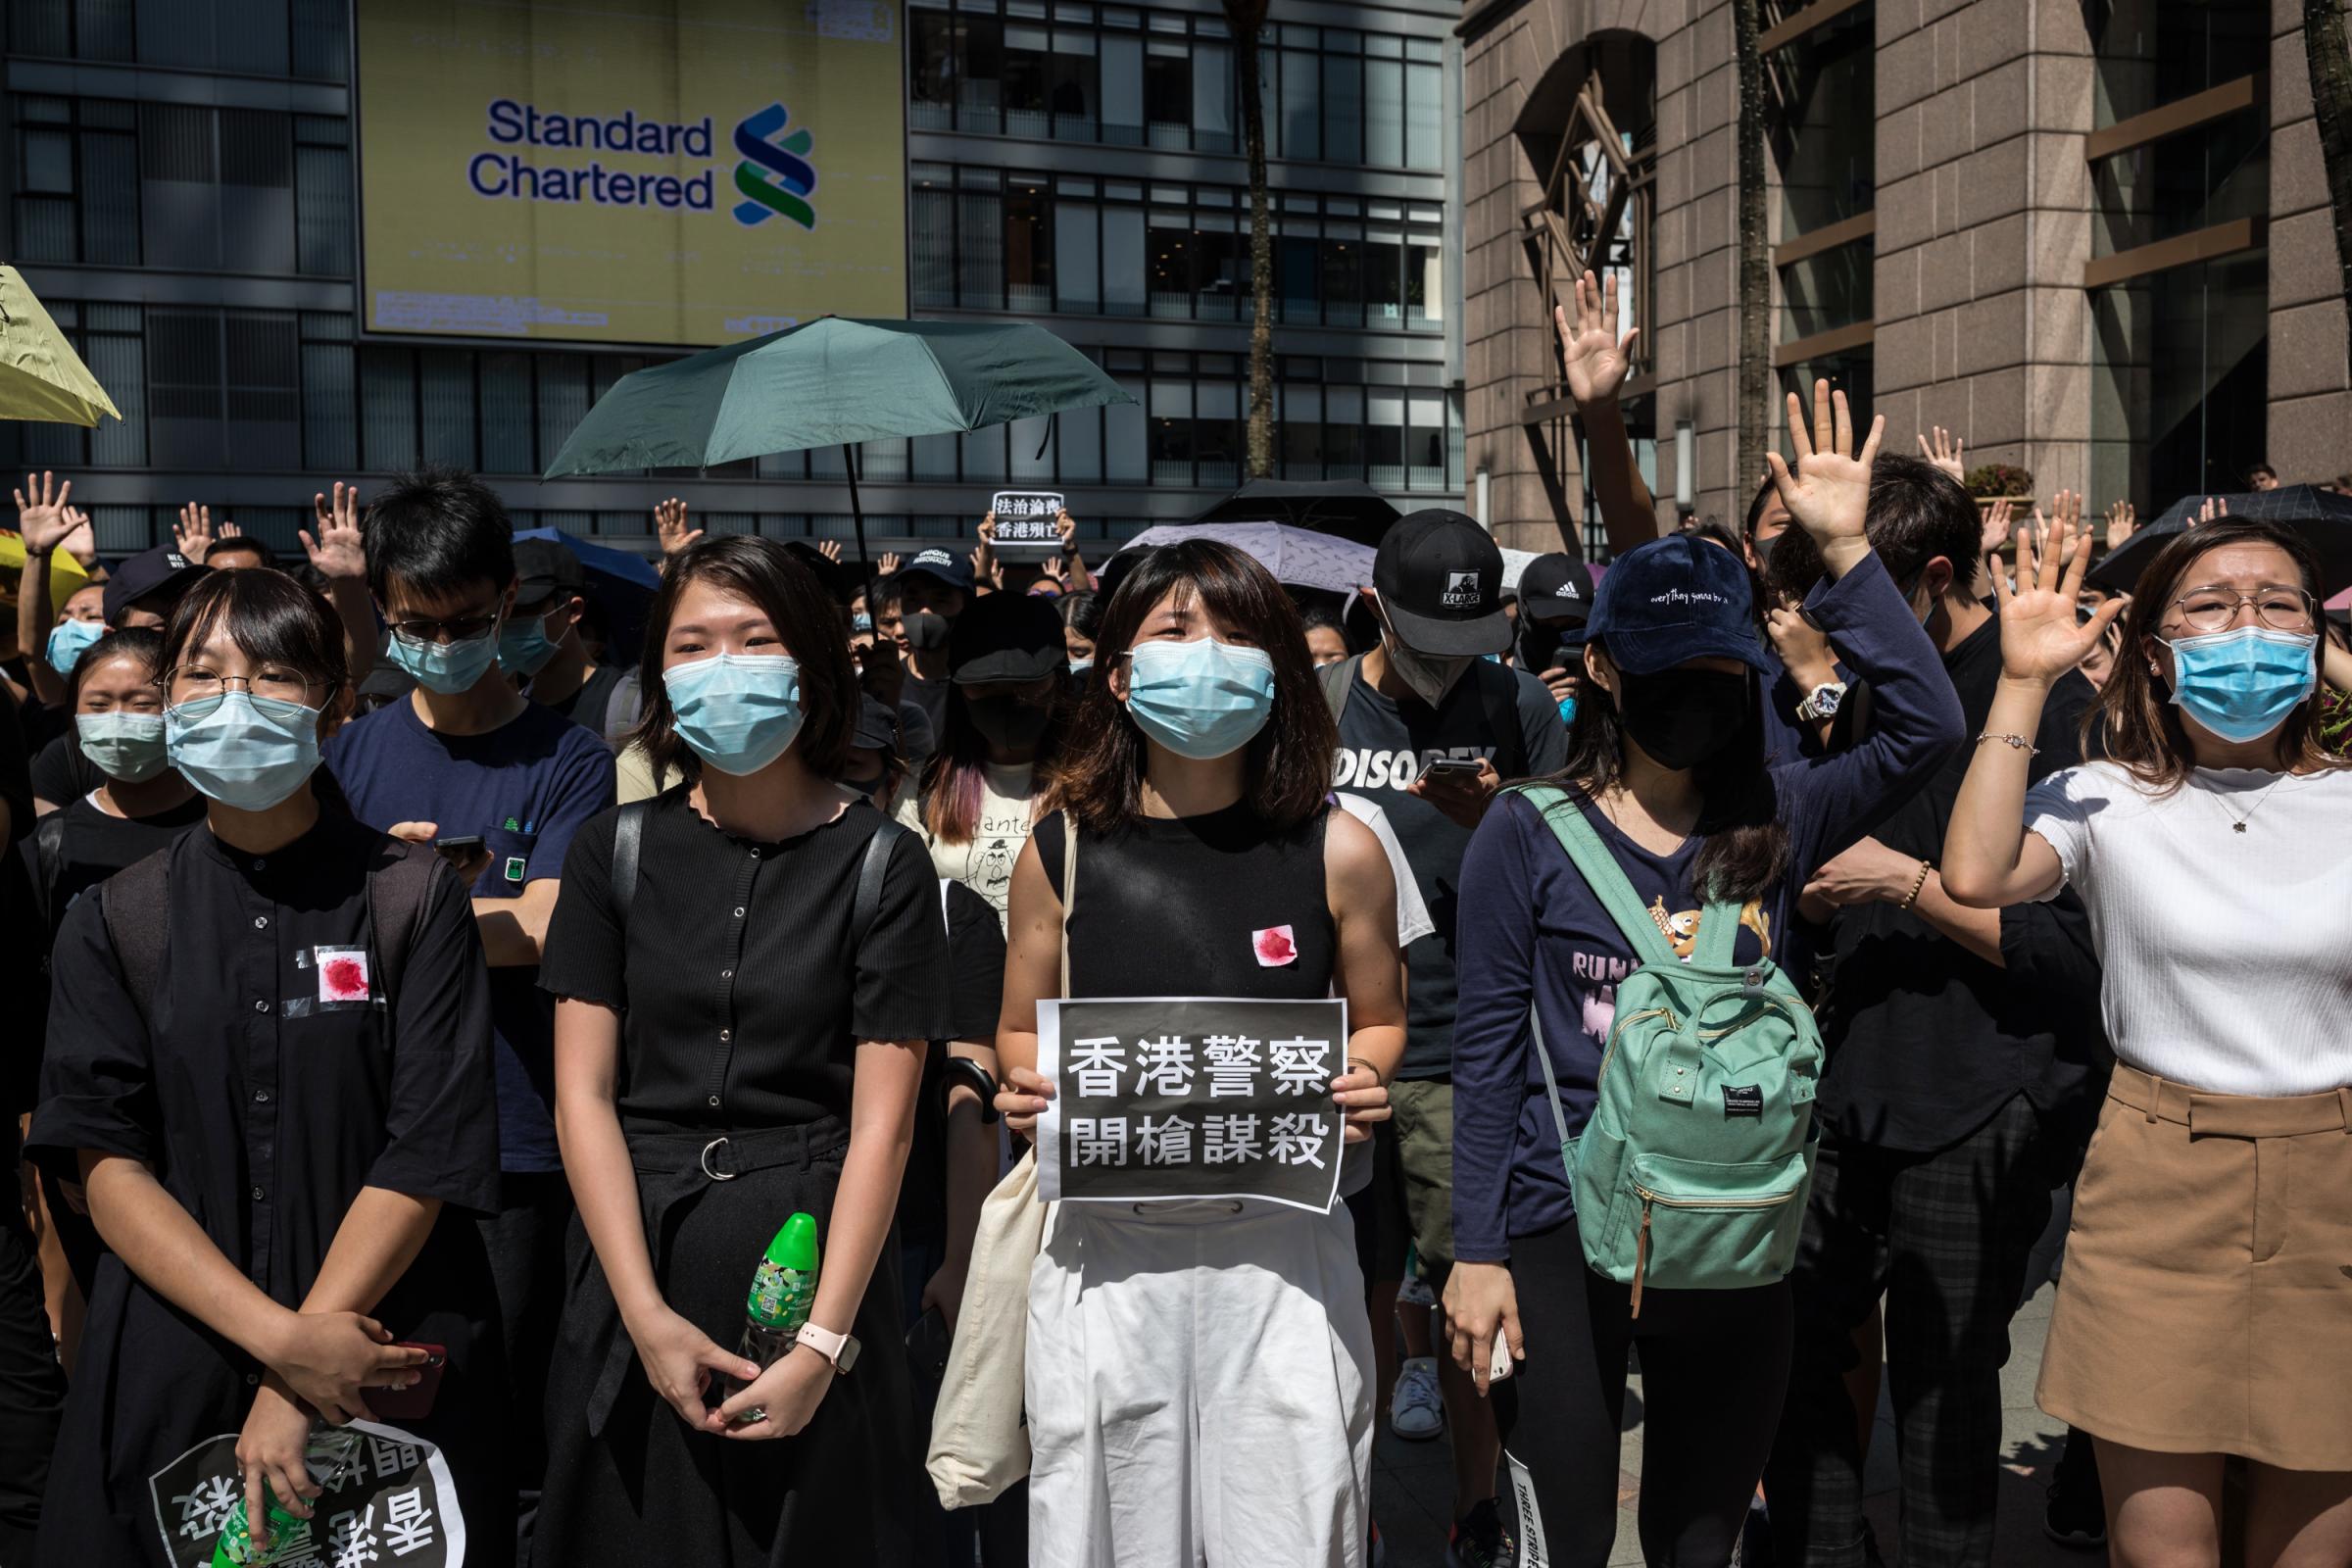 People March In Downtown Hong Kong After Demonstrator Shot